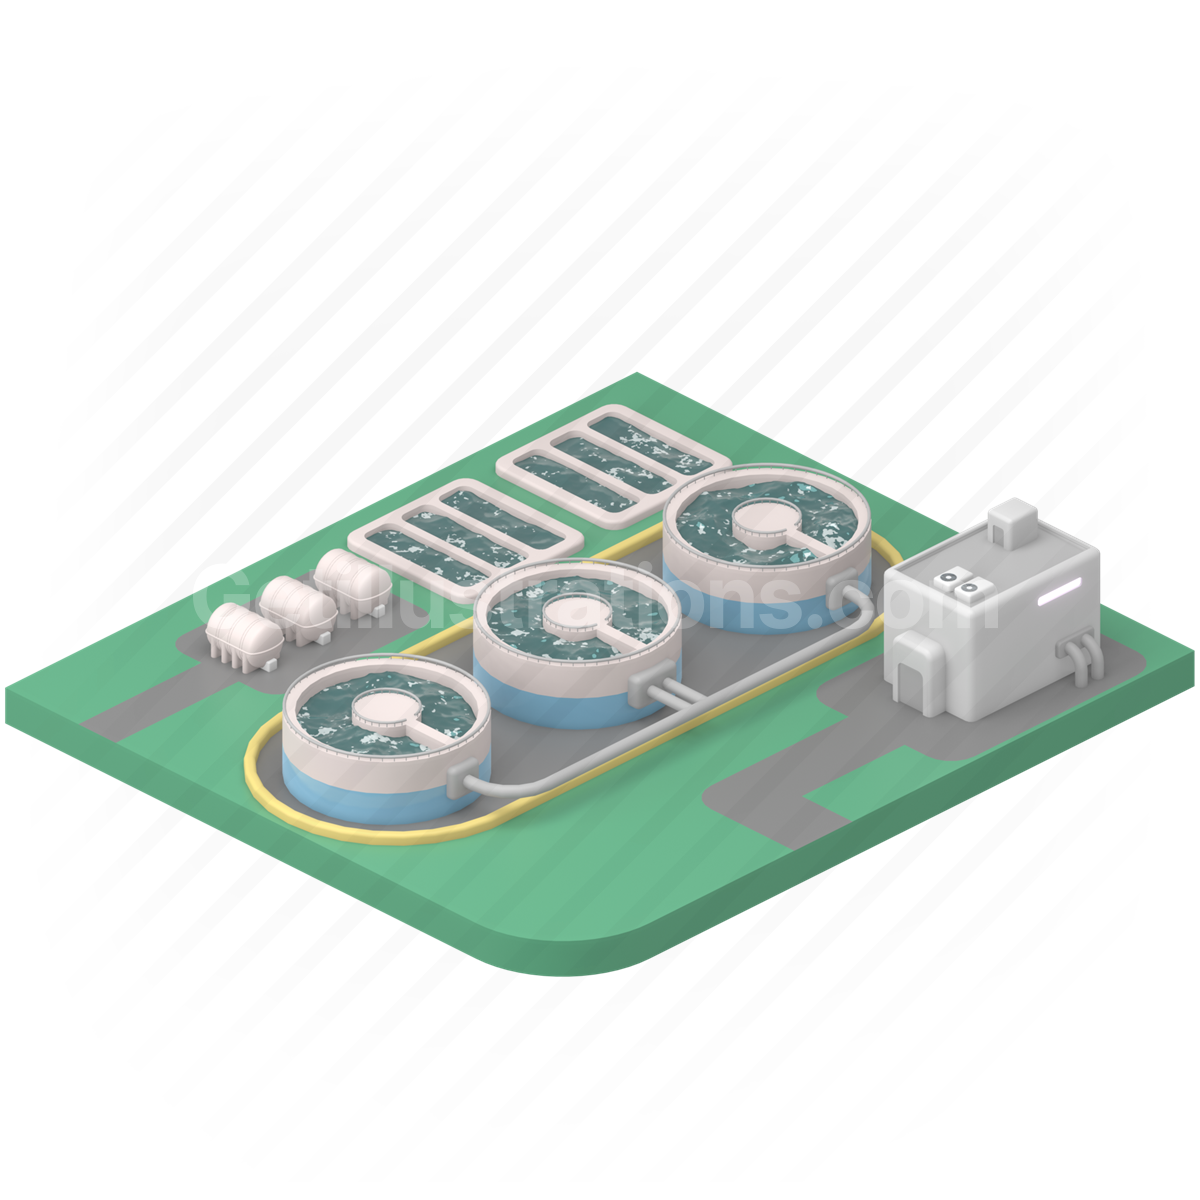 water, production, water treatment plant, water treatment